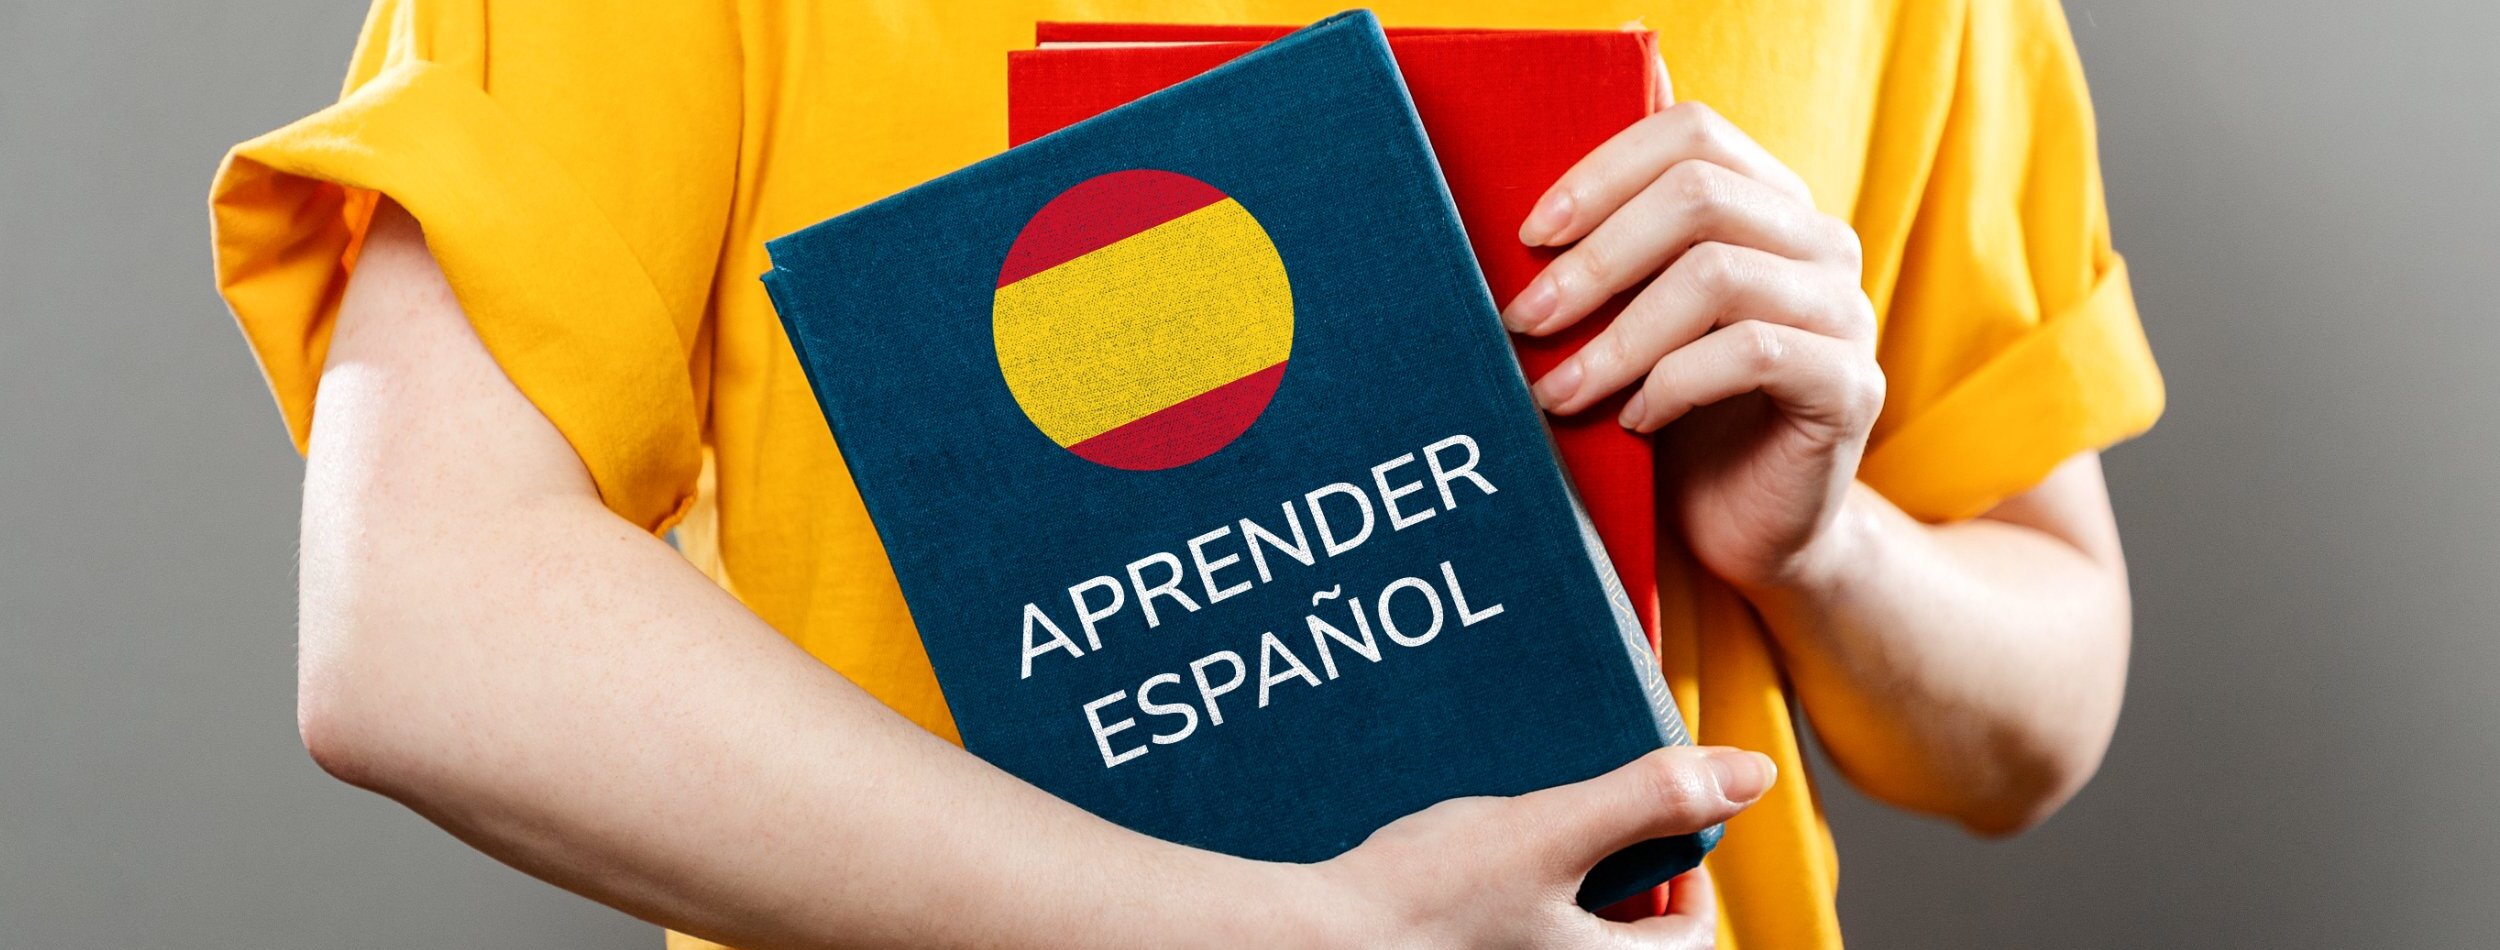 A girl holding some spanish books